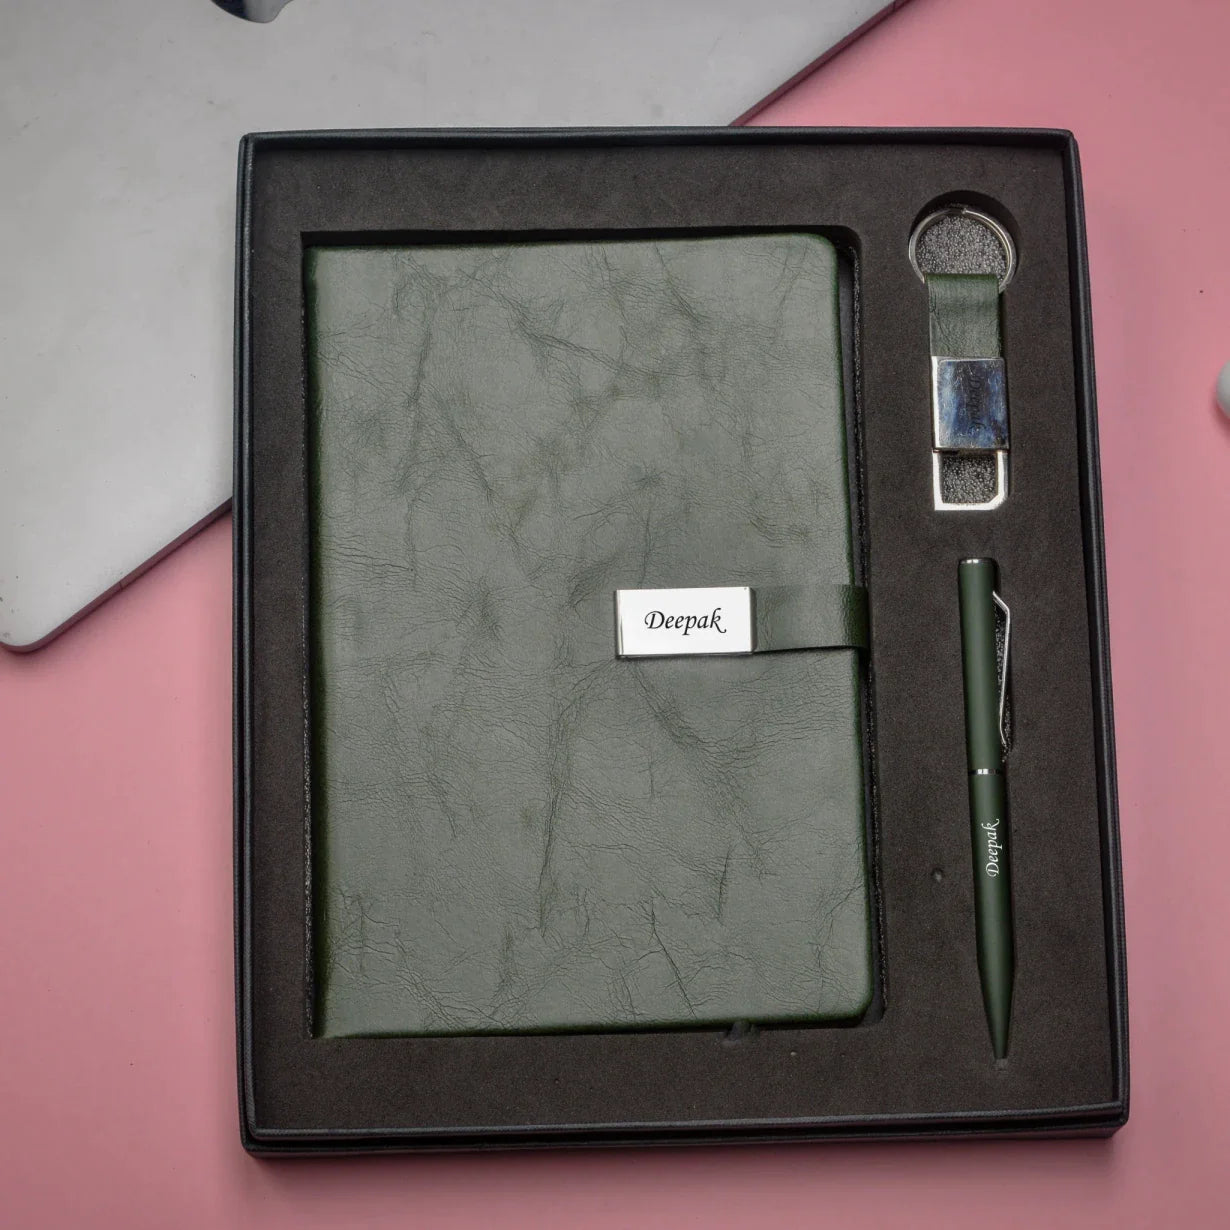 "Elevate your professional image with our sophisticated corporate set. Our elegant diary, smooth pen, and sleek keychain will give you a polished and professional look."